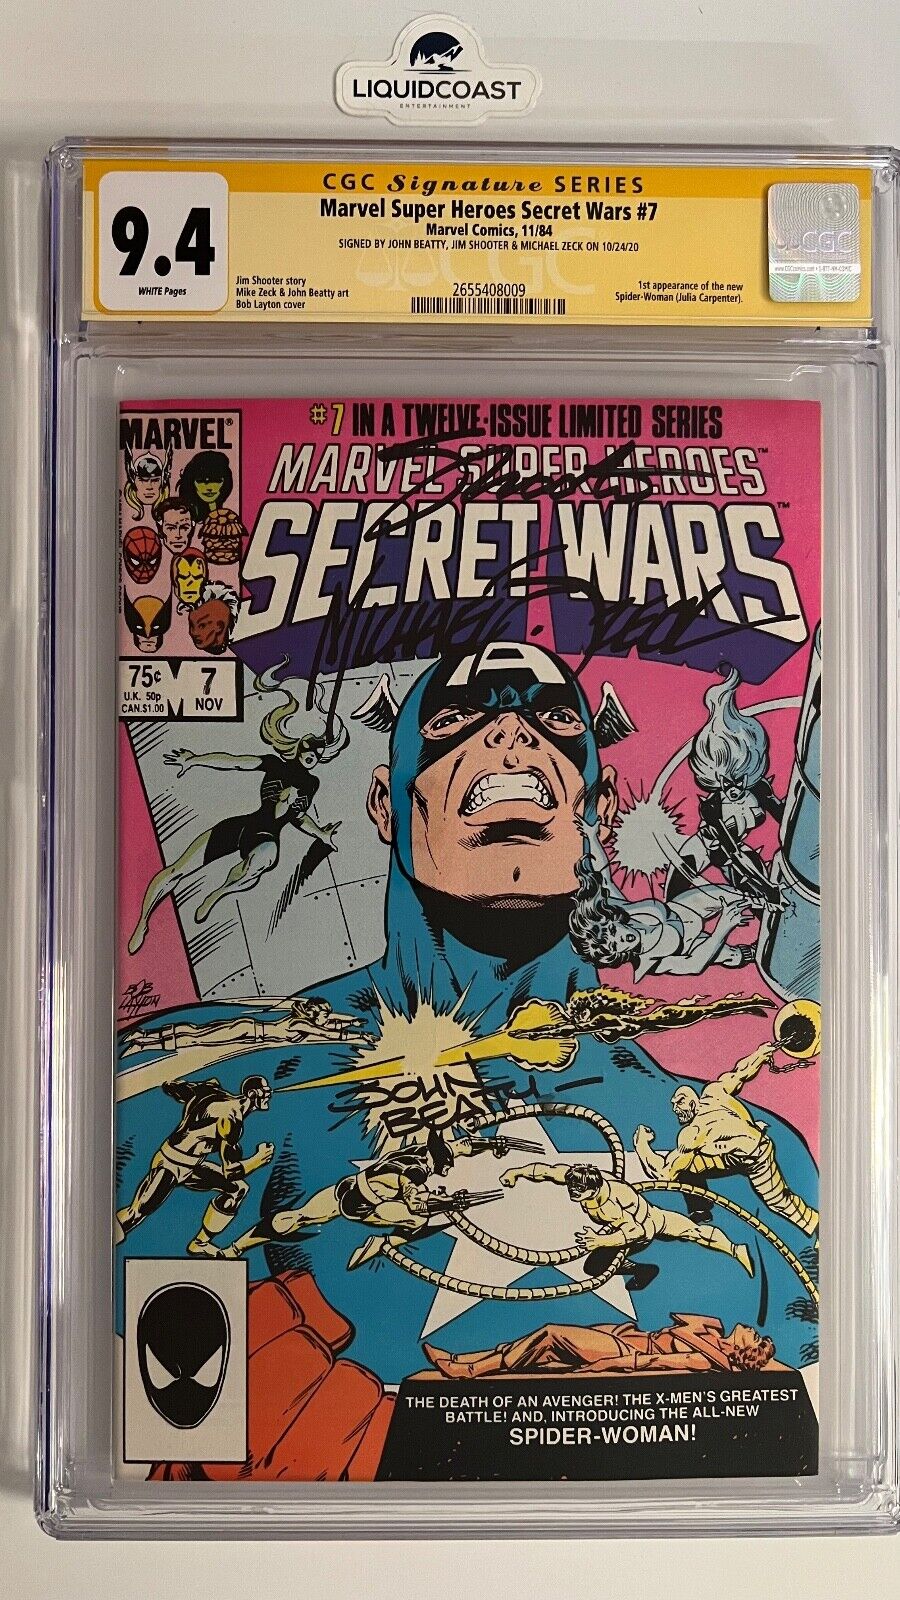 Marvel Super Heroes Secret Wars #7 SS CGC 9.4 SIGNED BY BEATTY, SHOOTER, ZECK